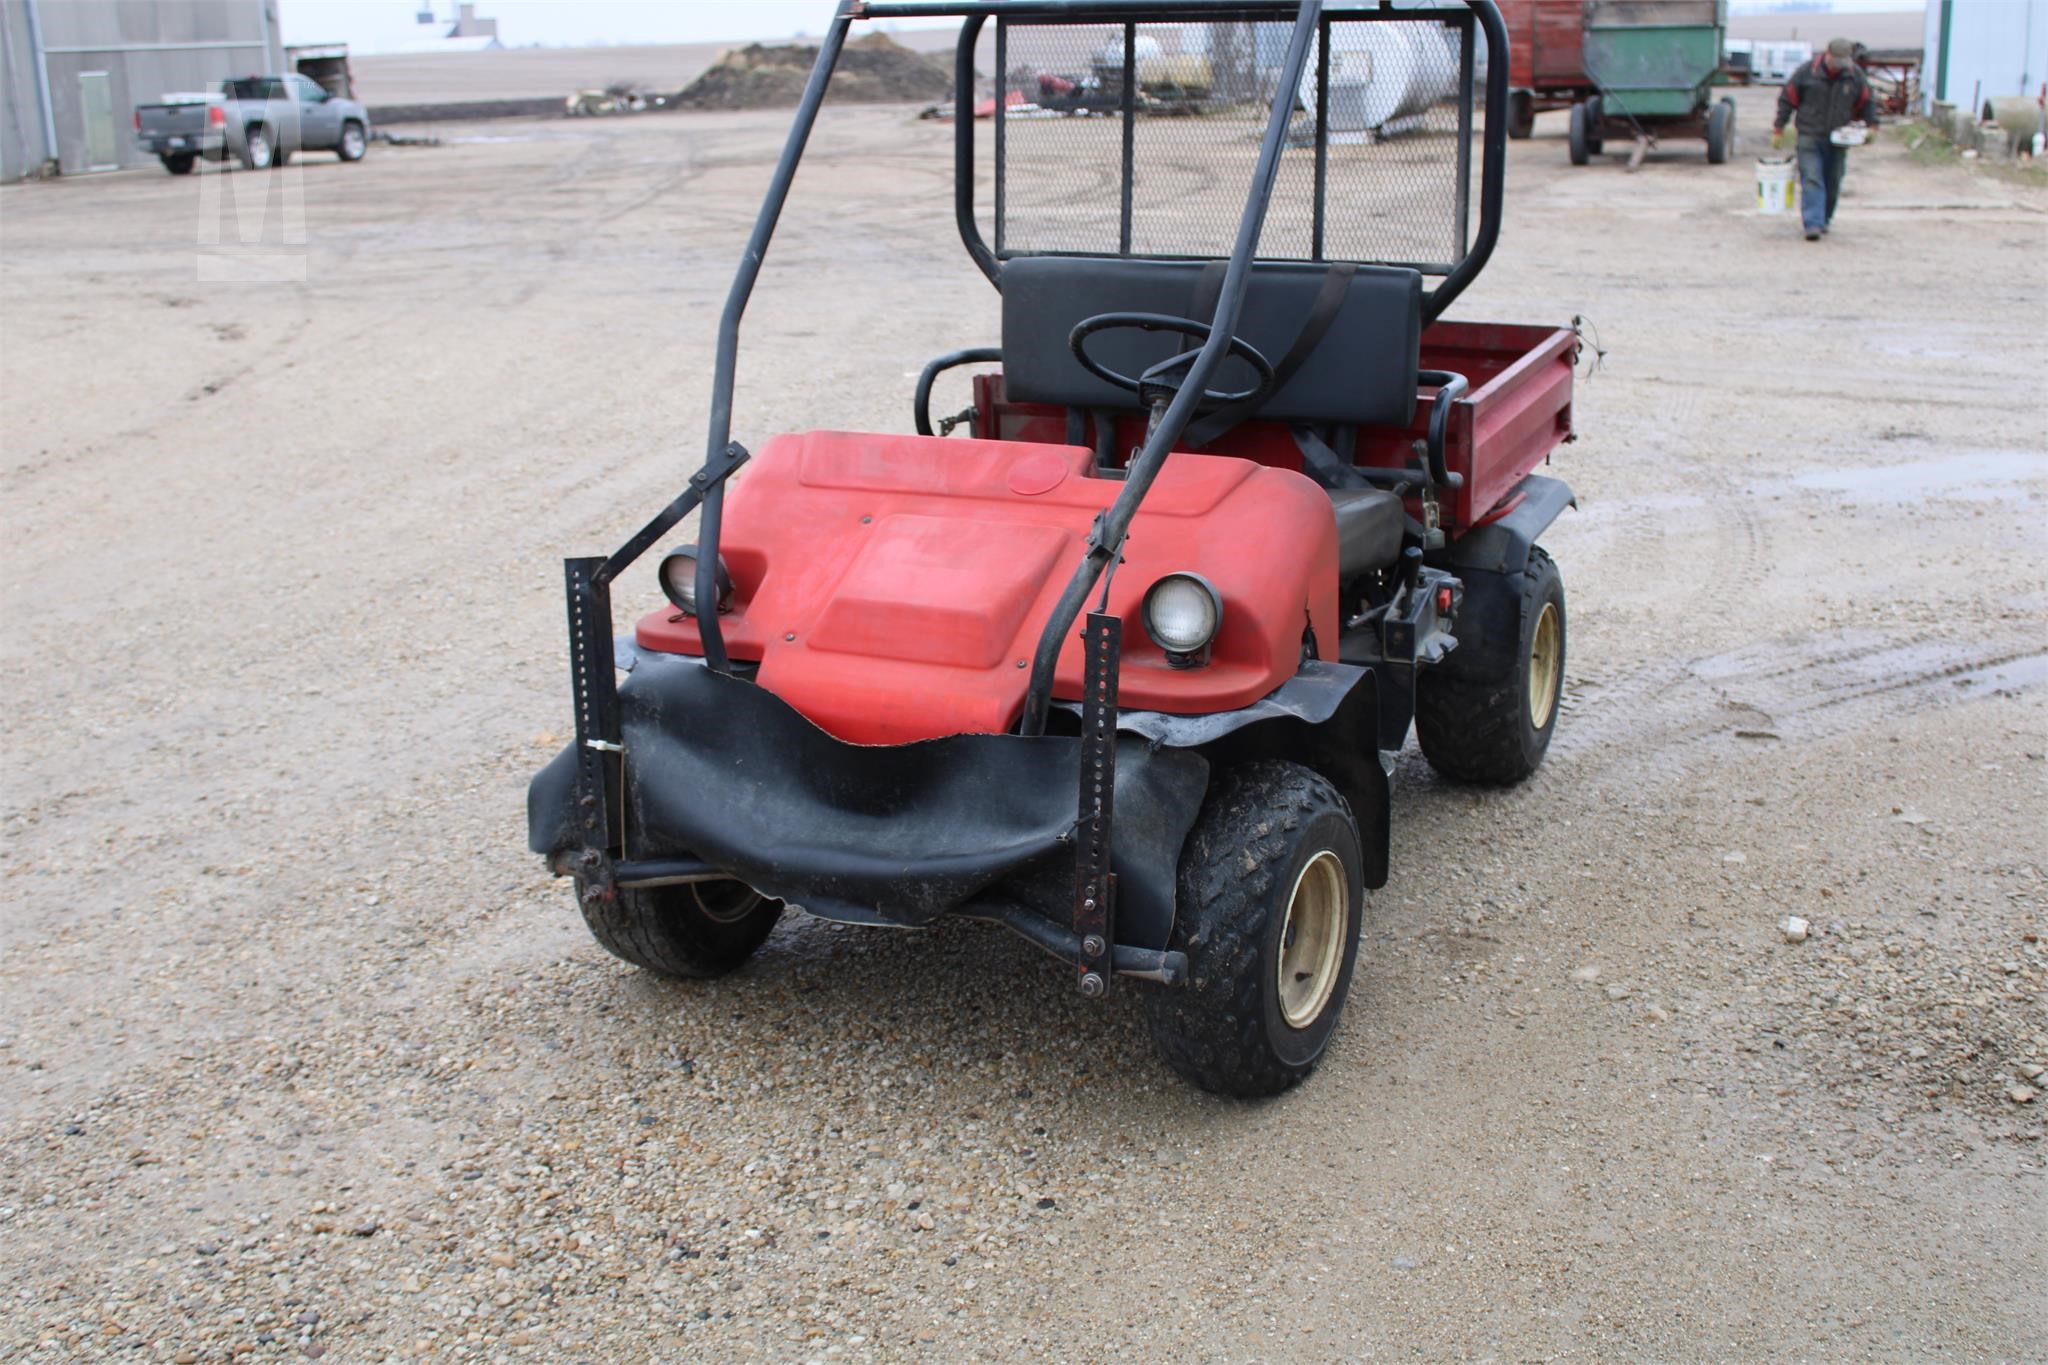 KAWASAKI MULE For Sale - 22 Listings | MarketBook.ca Page 1 of 1